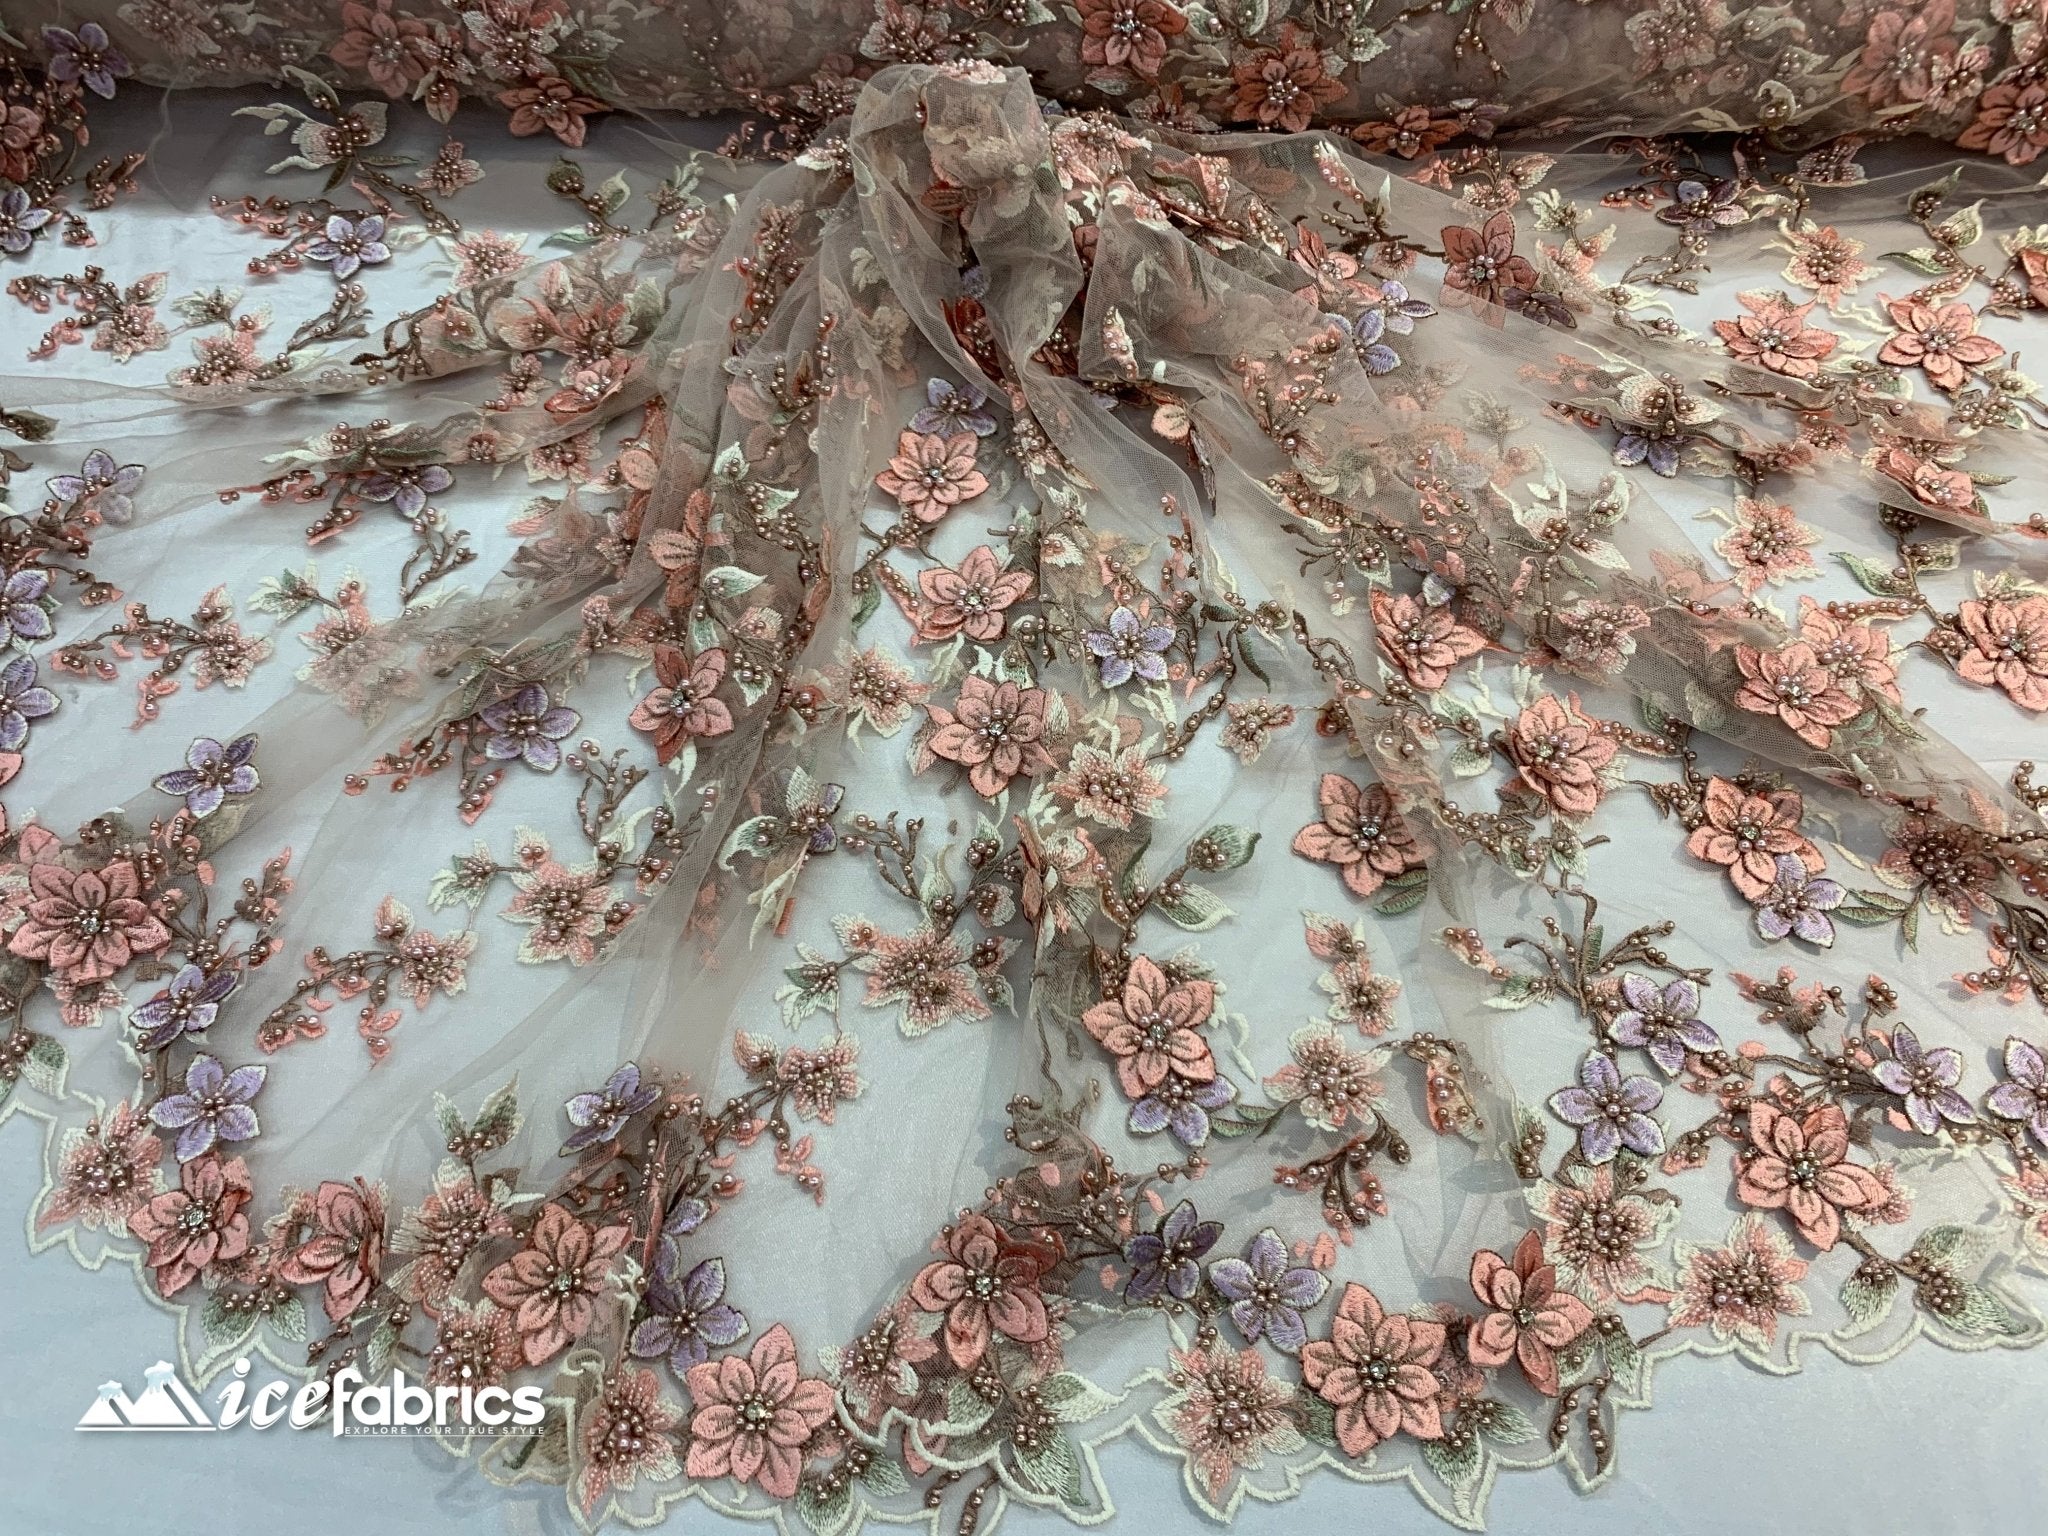 Embroidered Fabric/ 3D Flowers Beaded Fabric/ Lace Fabric/ Dusty RoseICE FABRICSICE FABRICSDusty RoseEmbroidered Fabric/ 3D Flowers Beaded Fabric/ Lace Fabric/ Dusty Rose ICE FABRICS